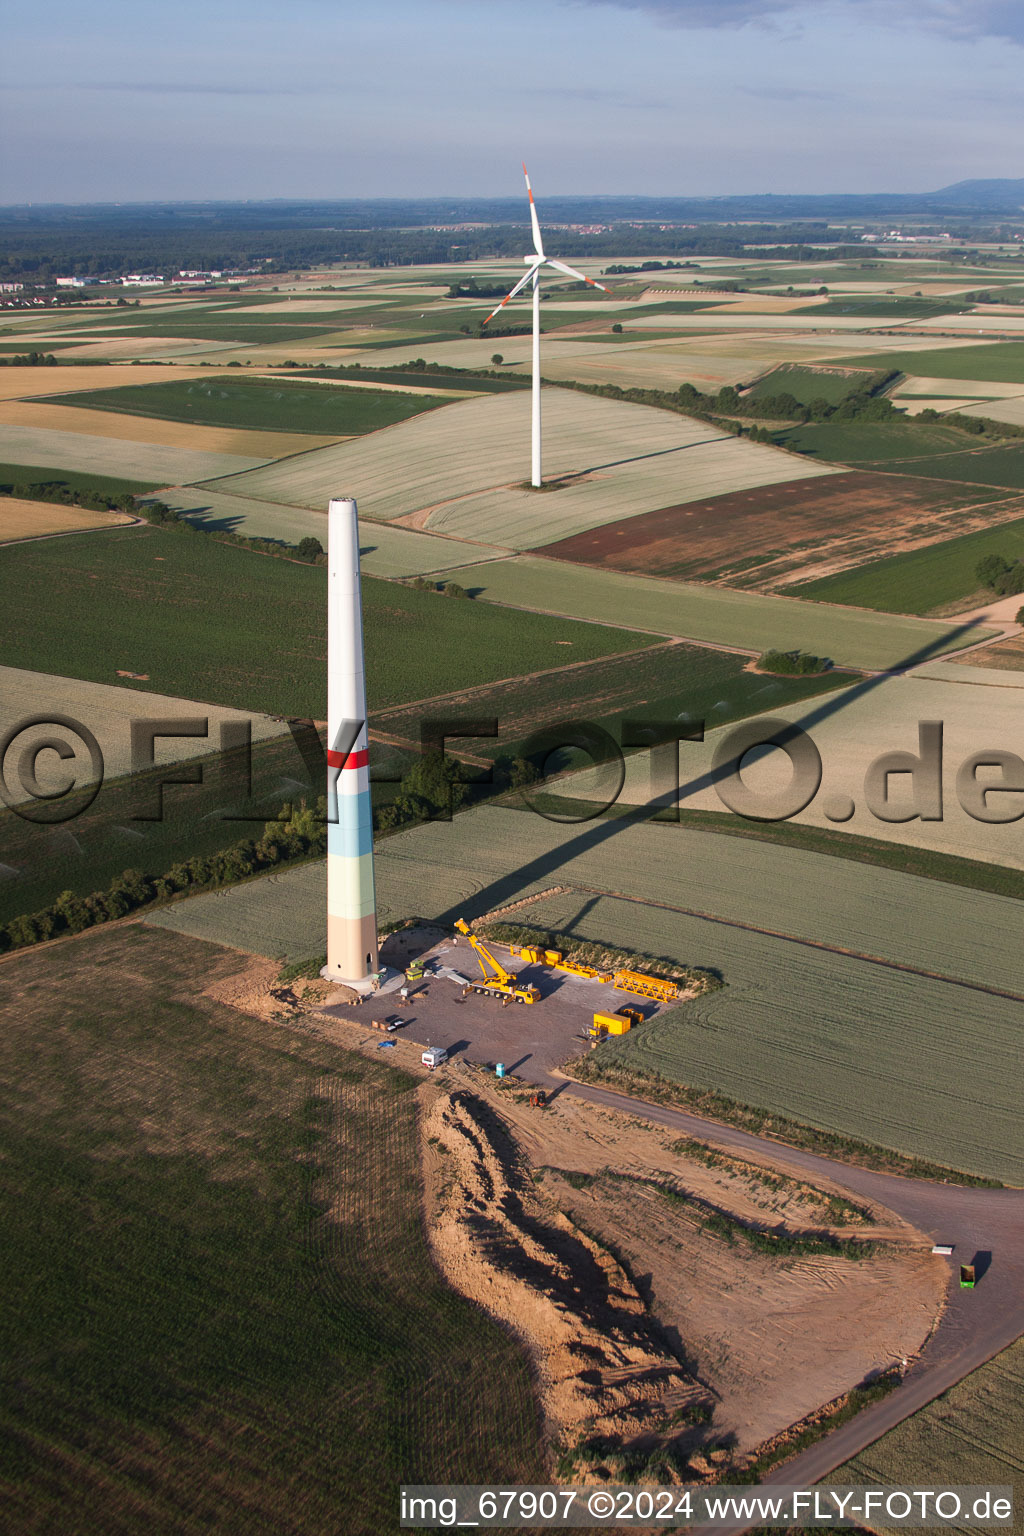 Oblique view of New wind farm in Offenbach an der Queich in the state Rhineland-Palatinate, Germany